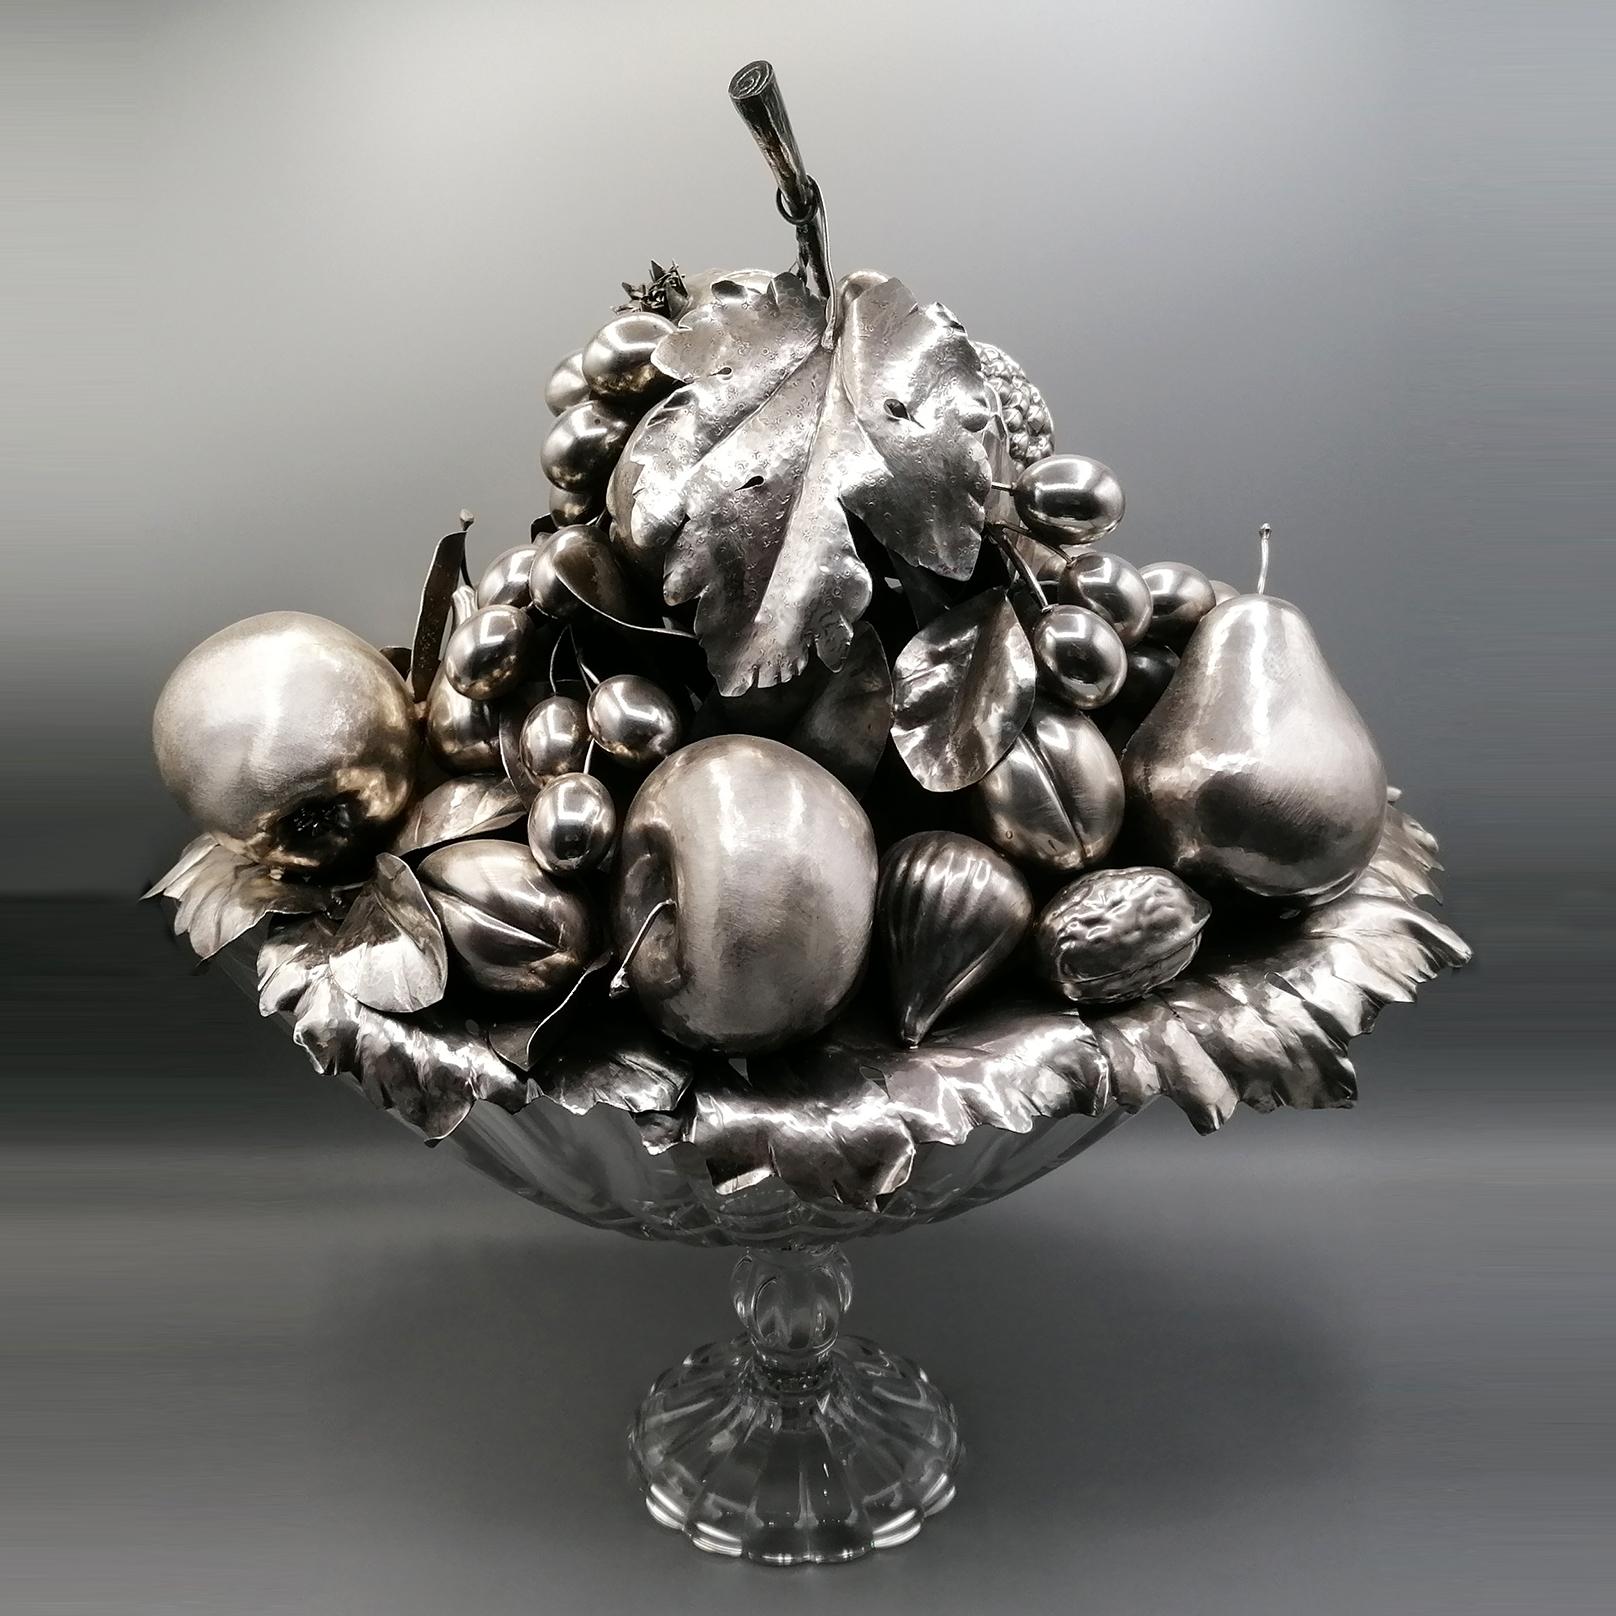 Solid sterling silver oval centerpiece with fruits and leaves composition made by chiseled silver sheet.
The fruit and leaves have been modeled by hand from the silver plate, shaped and chiseled to obtain the fruits and leaves to compose the